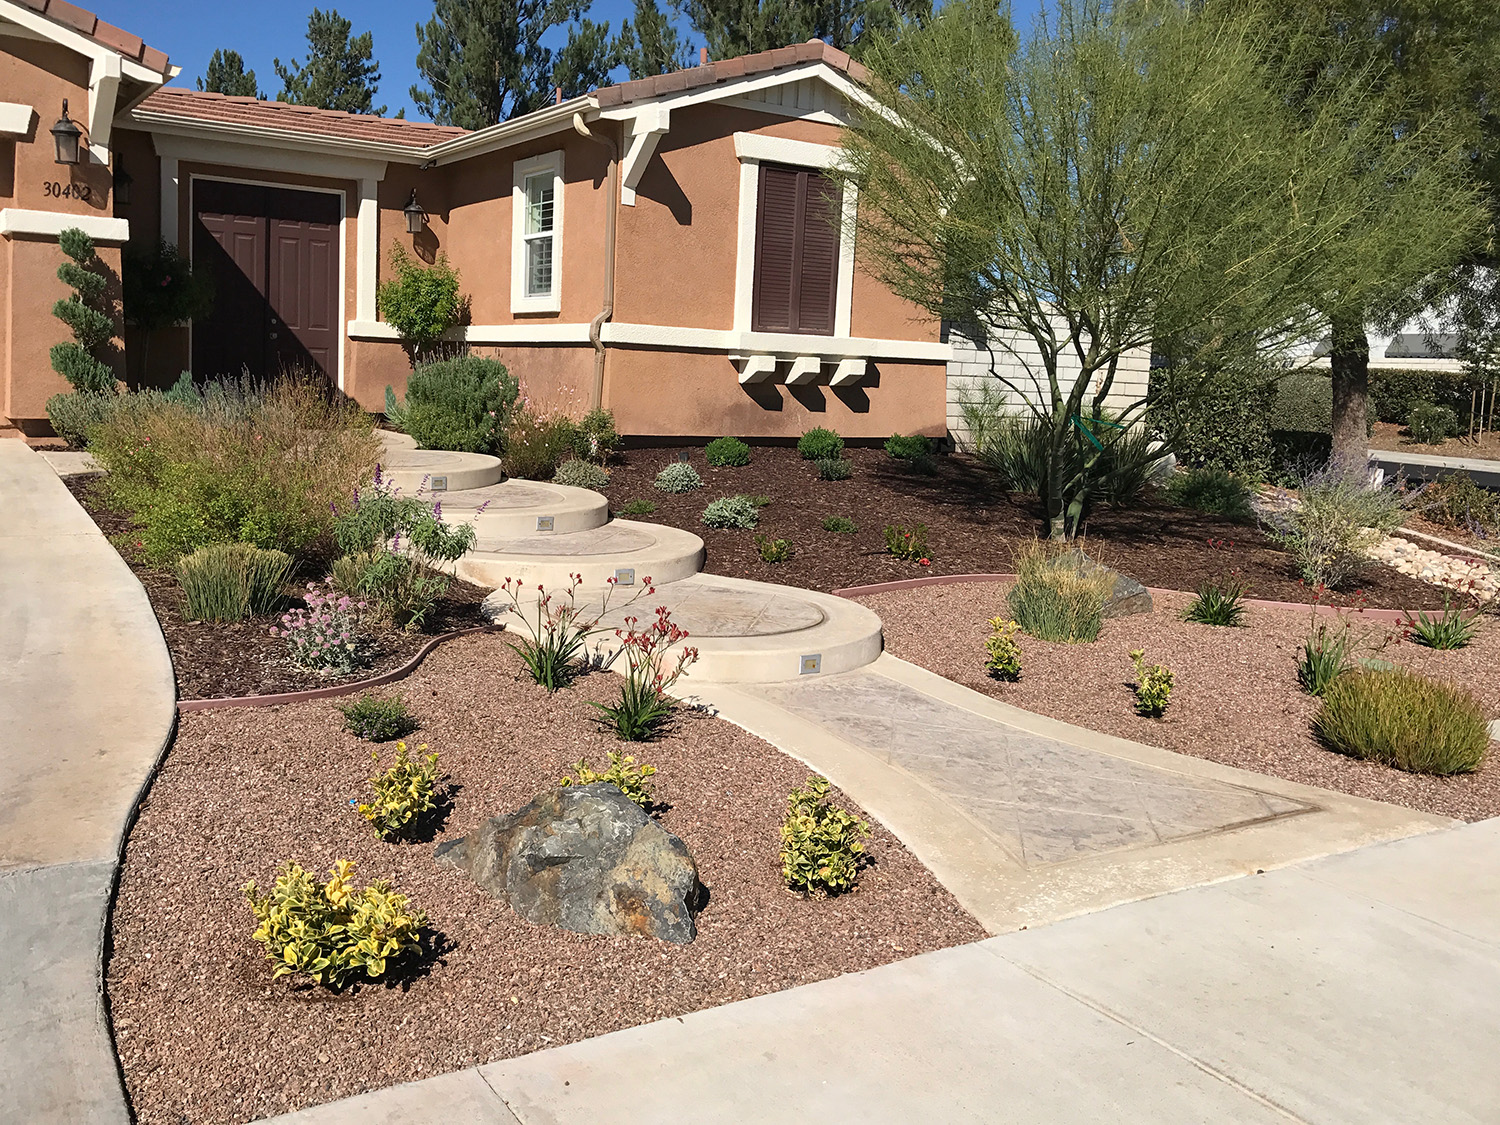 Front yard with gravel and drought tolerant plants